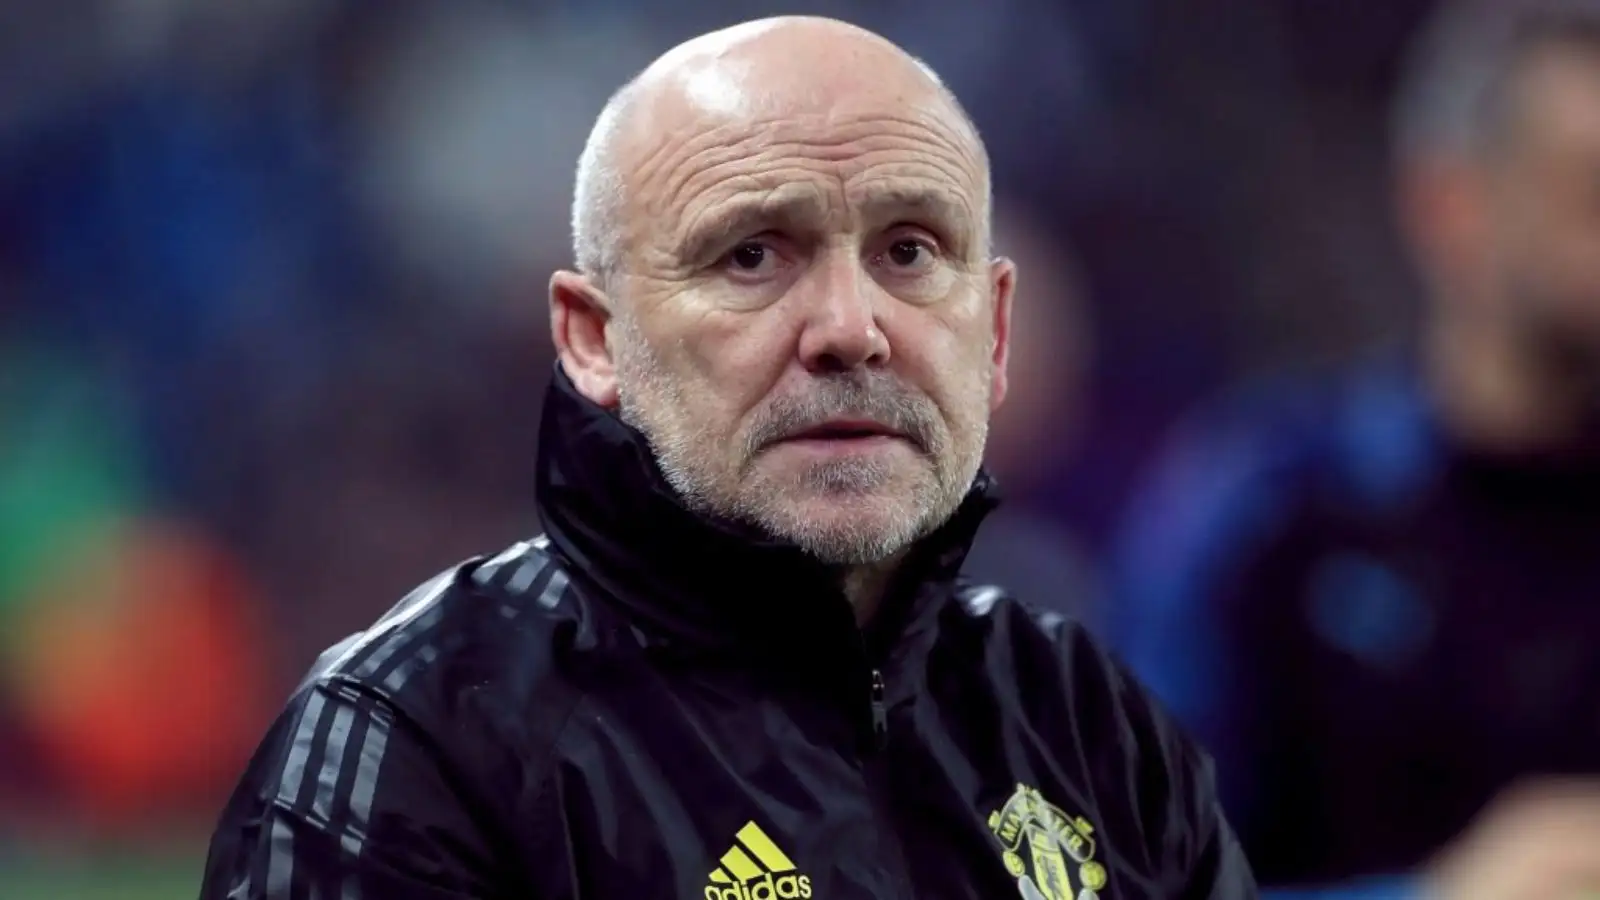 Former Manchester United coach Mike Phelan before a match.